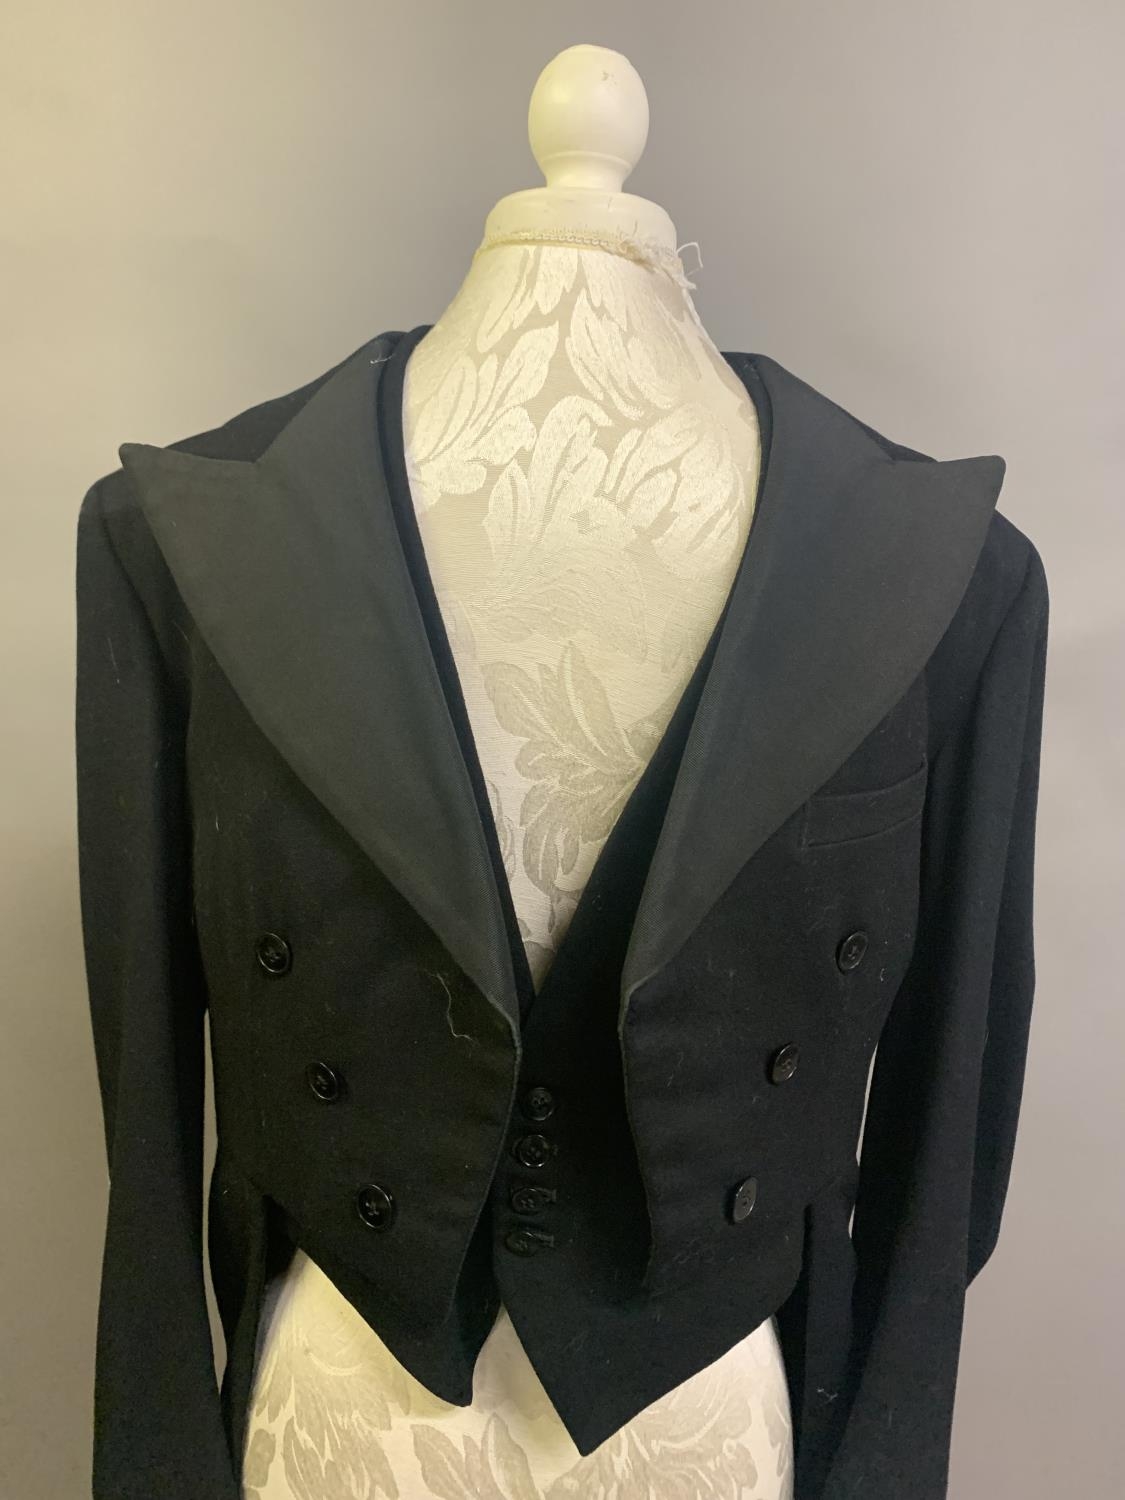 A gentleman’s vintage 3-piece morning suit with striped trousers and waistcoat, short jacket with - Image 2 of 4